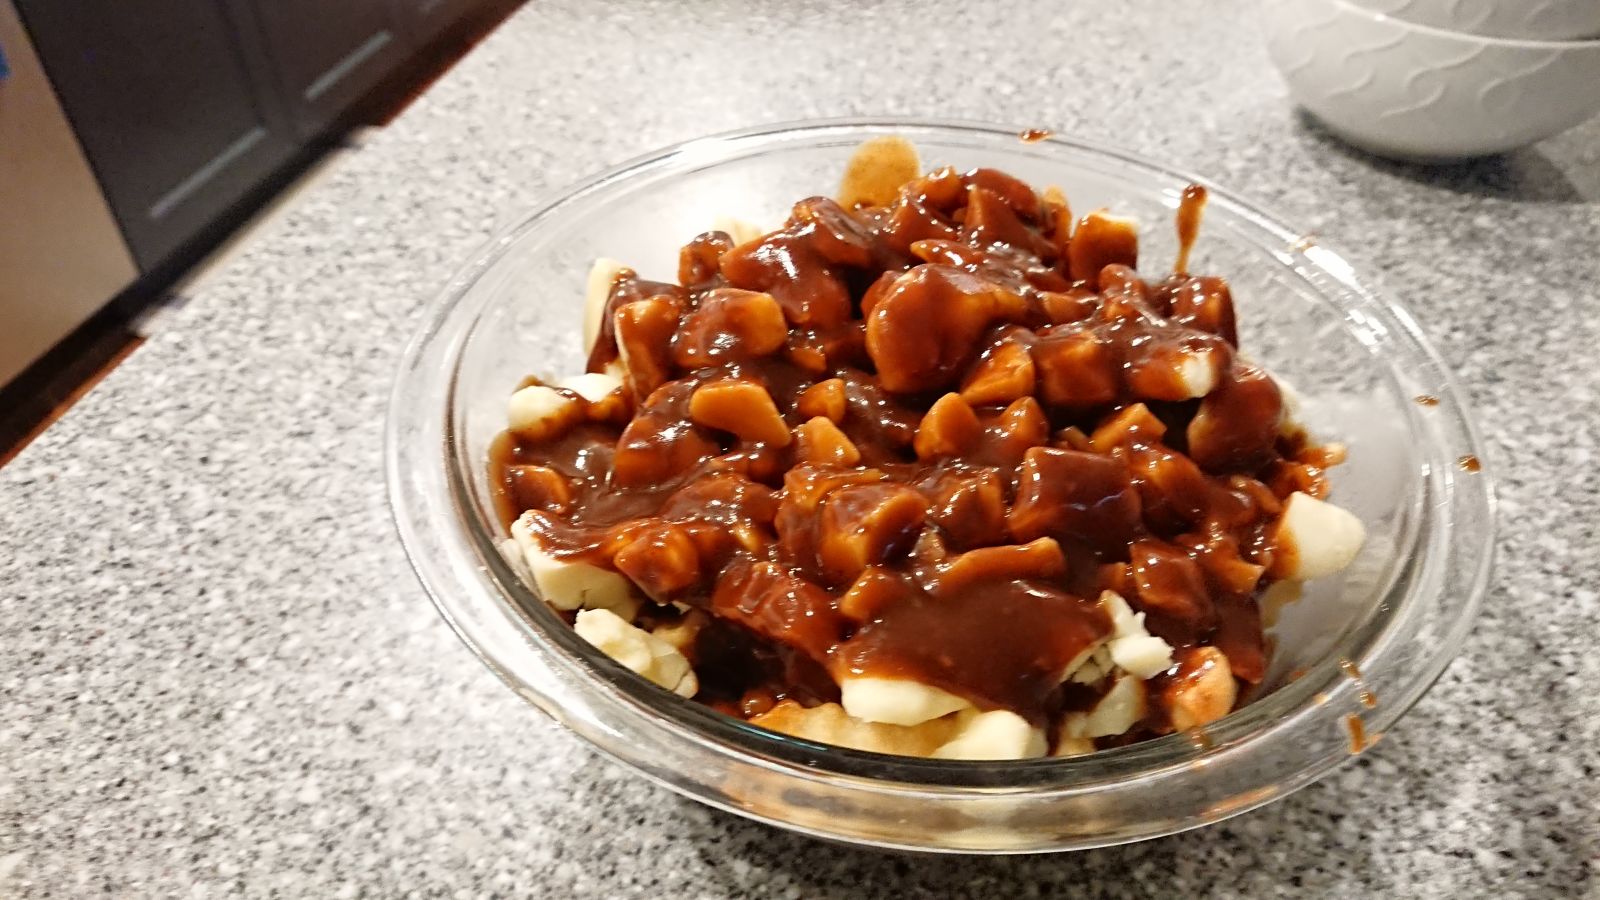 Illustration for article titled Tonights Poutine: Homemade to my standards.